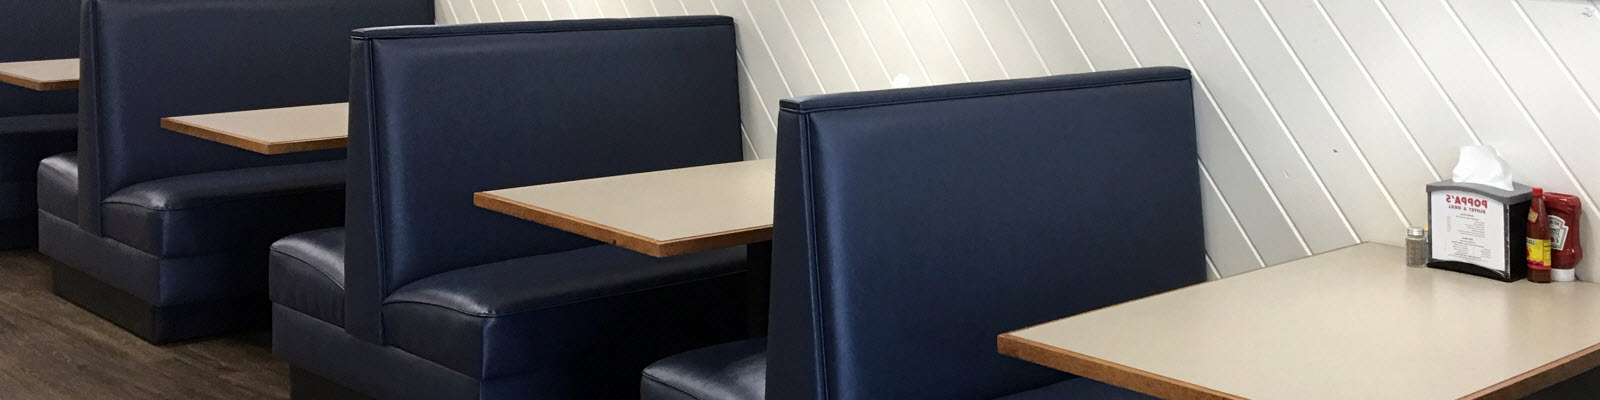 How do I choose the right restaurant booth?